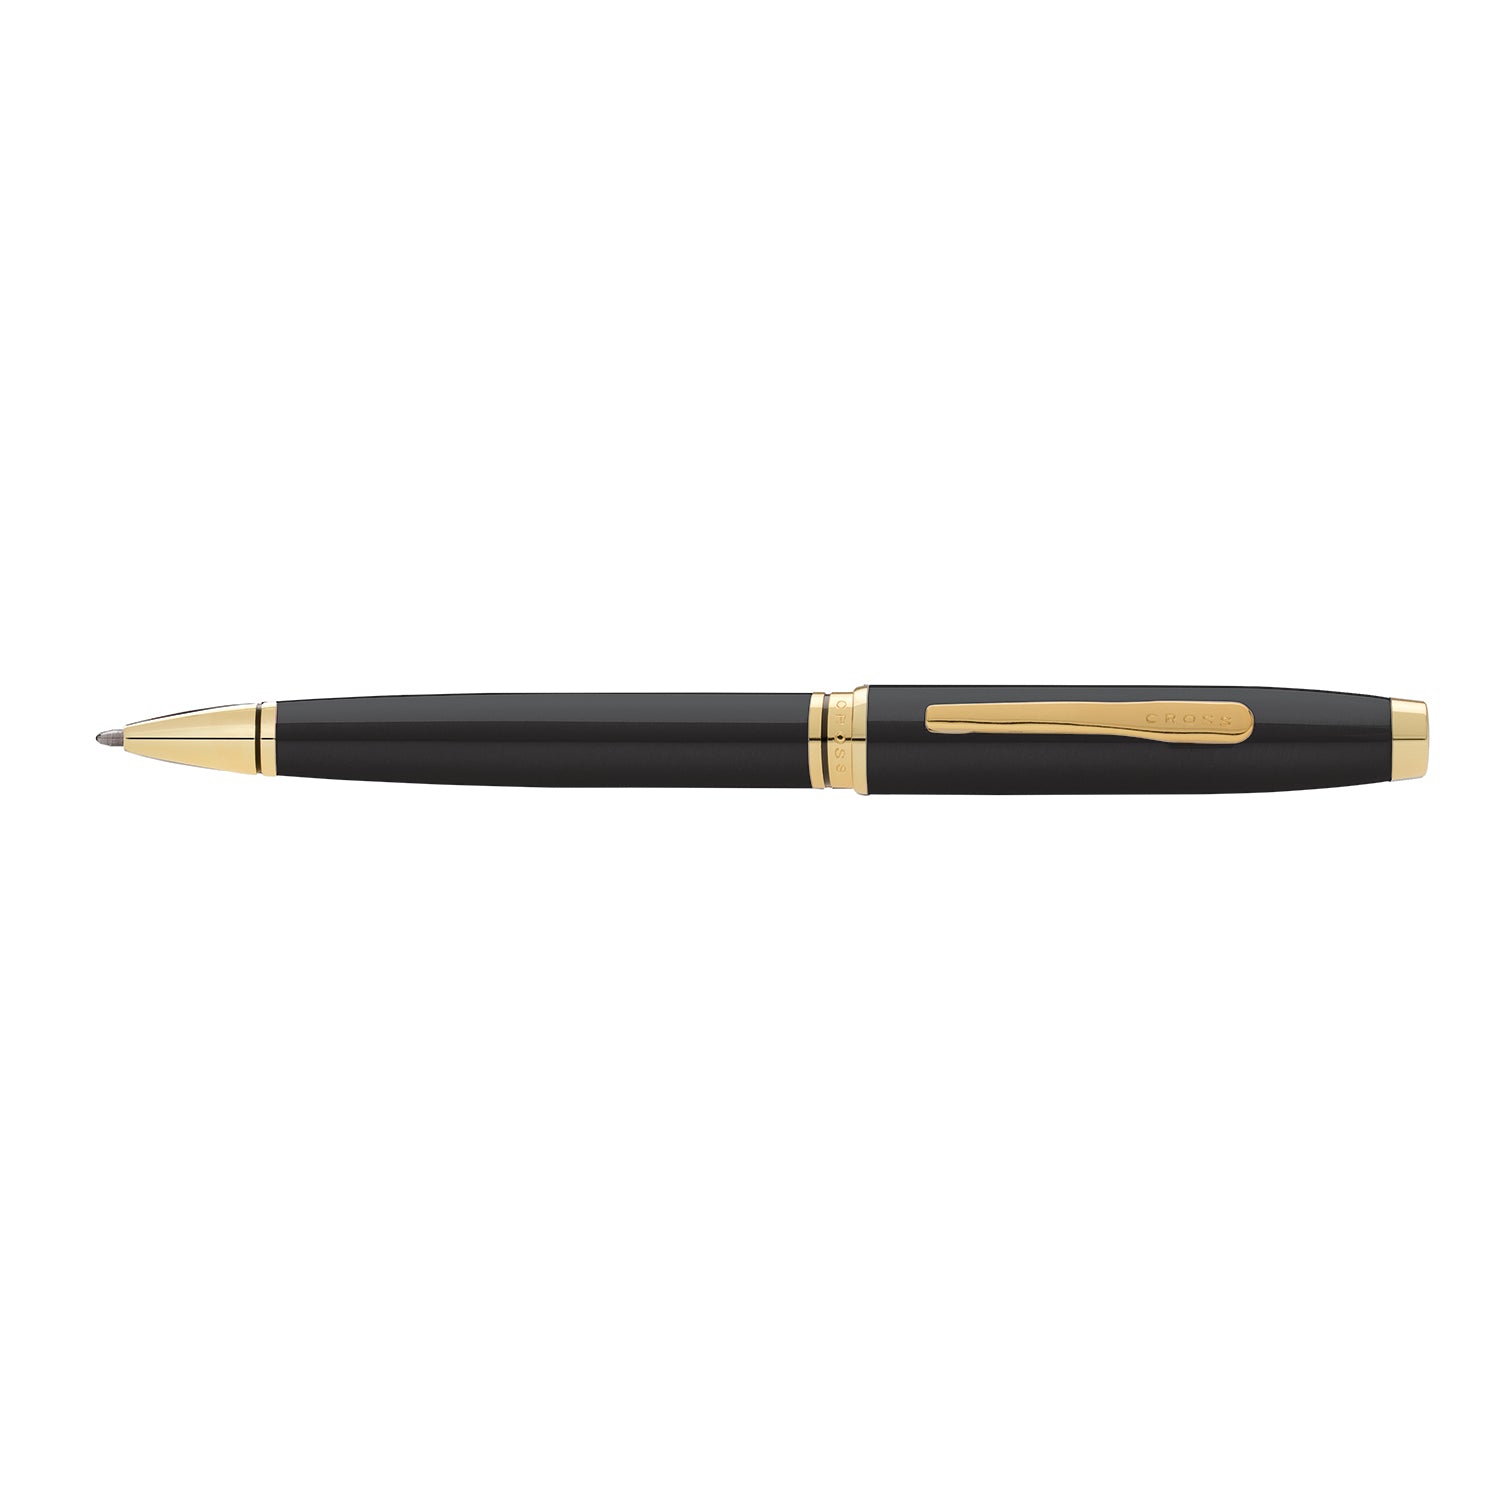 Coventry Black Laquer With Gone-Tone Ballpoint Pen - AT0662G-11